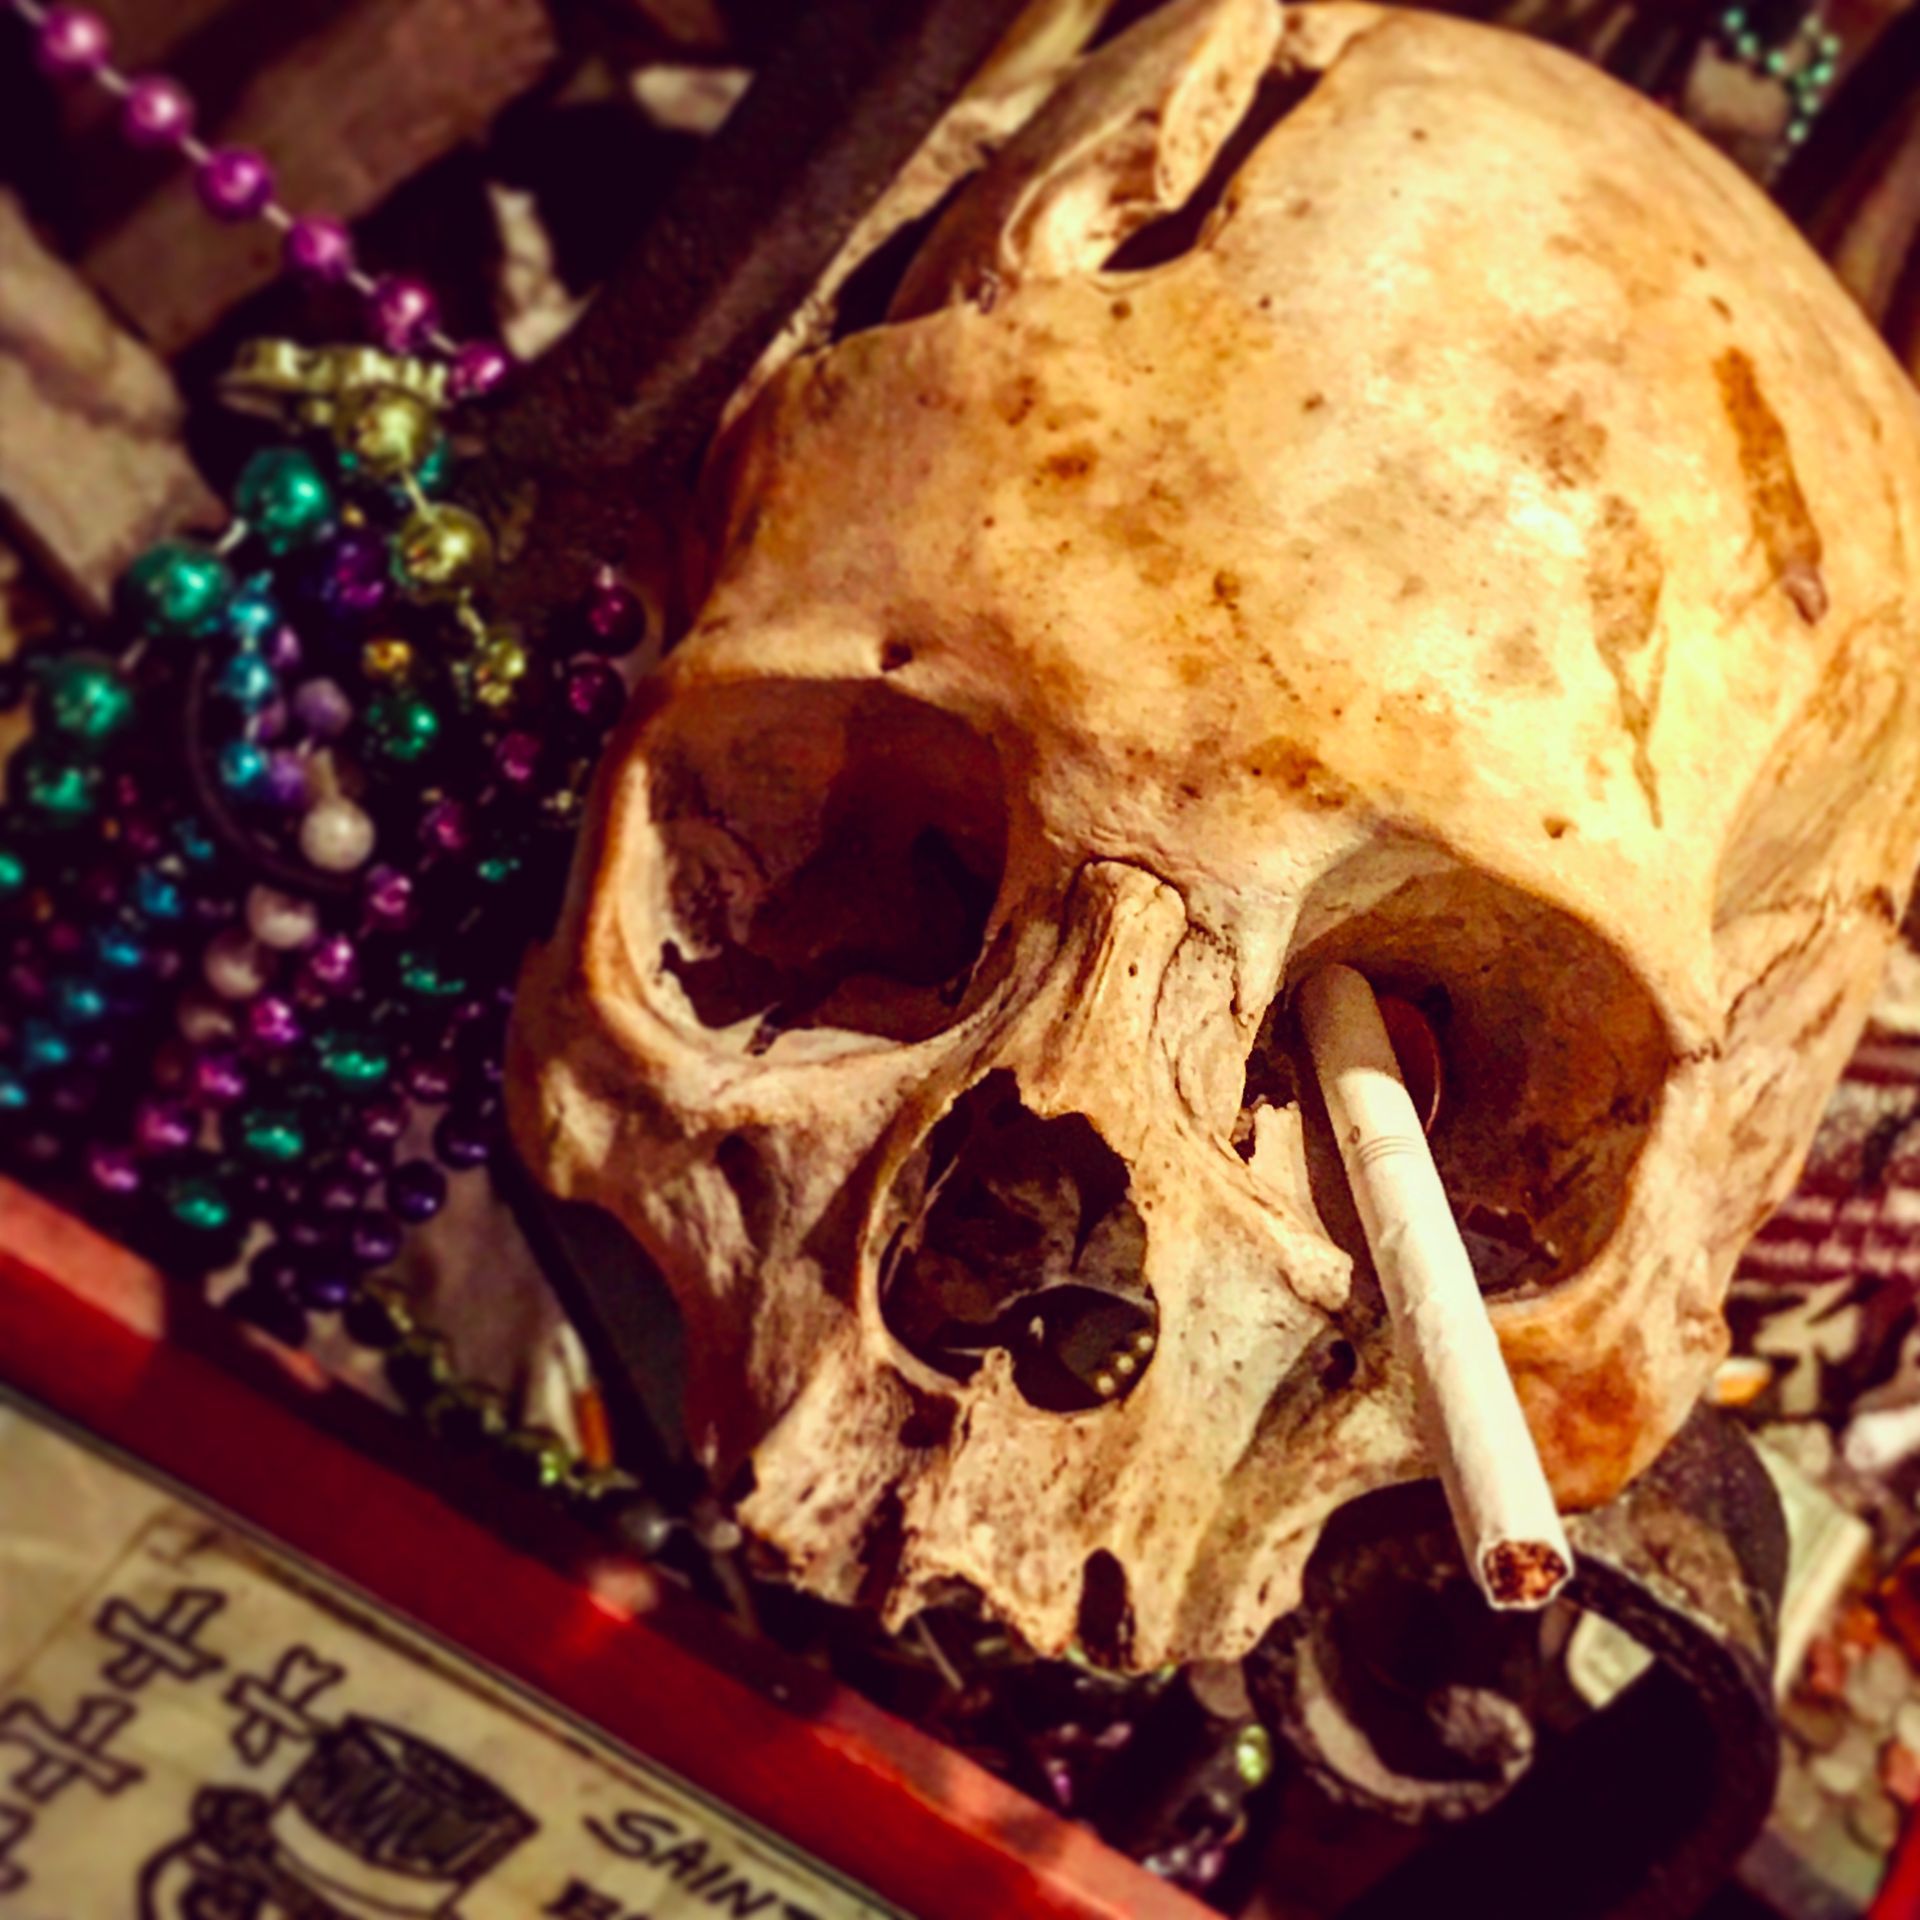 An offering at the New Orleans Voodoo Museum a skull with a cigarette and some Mardi Gras beads